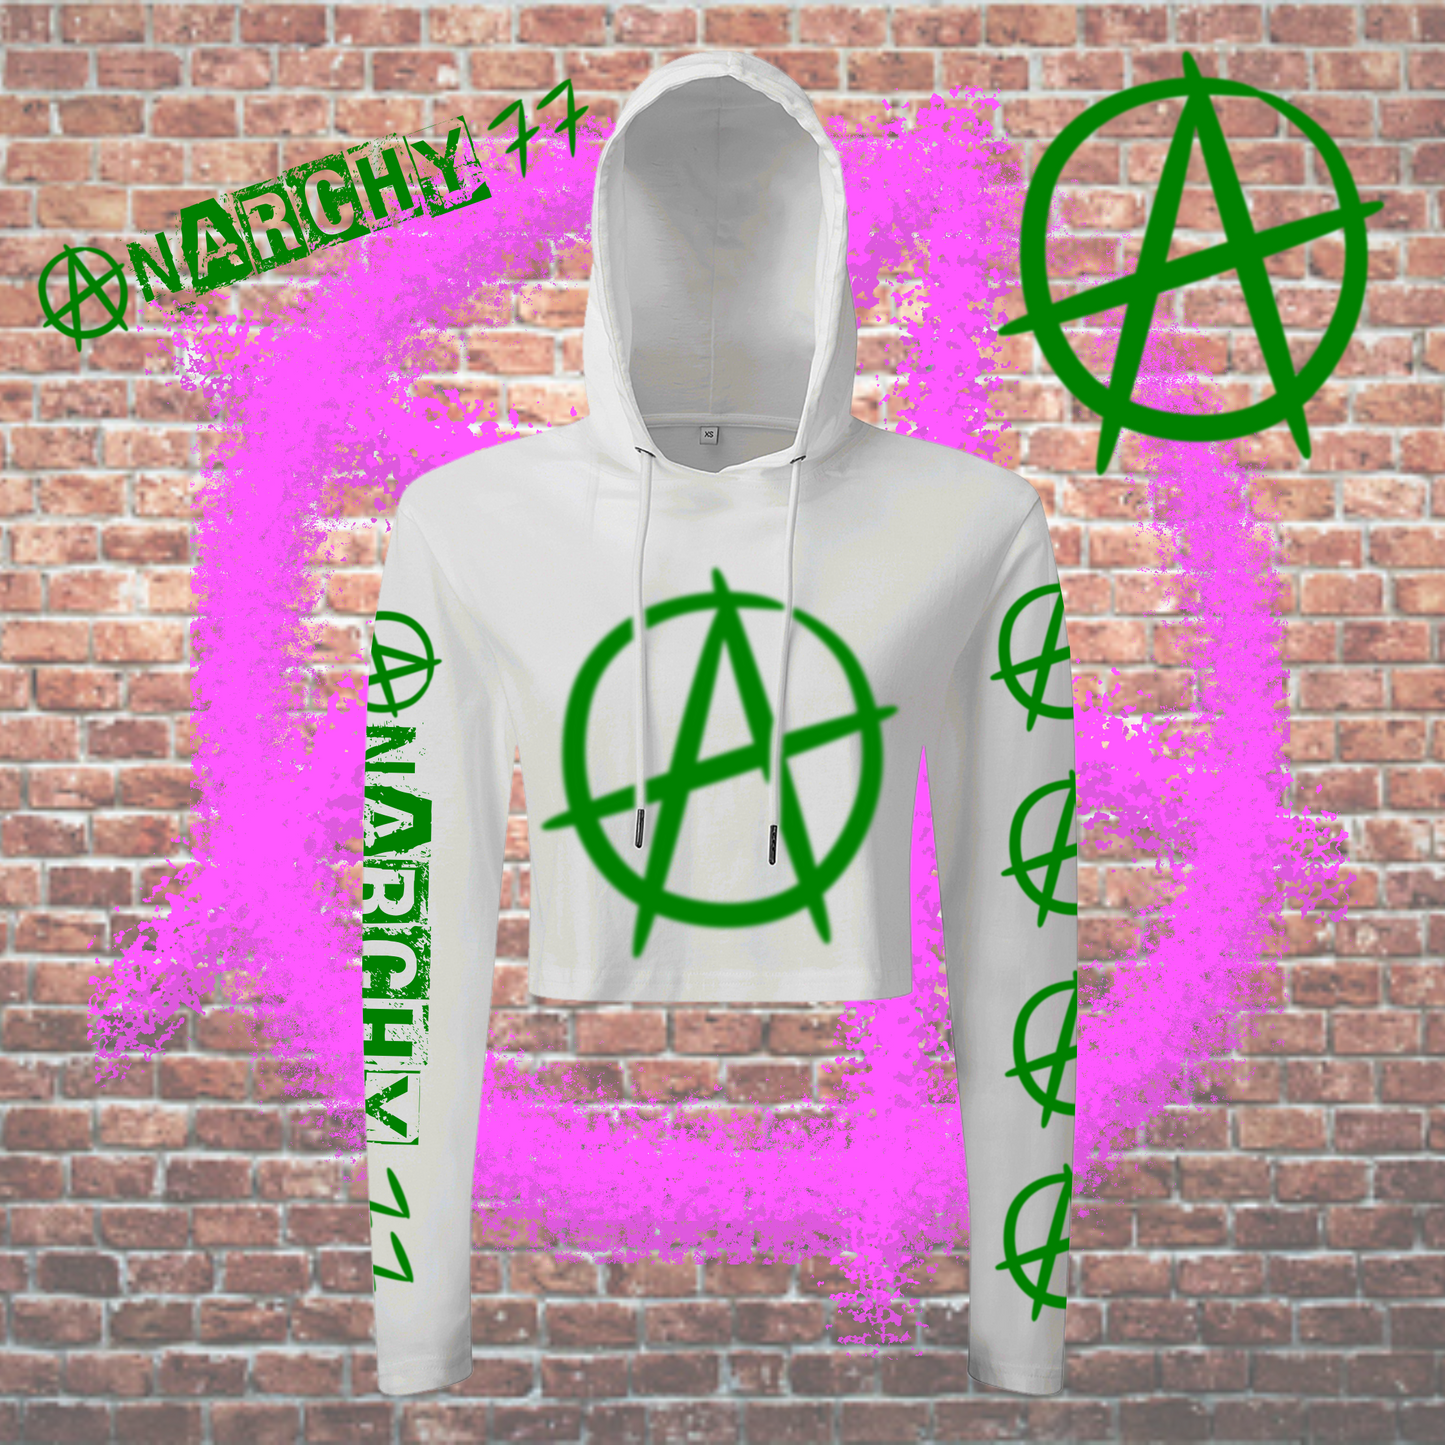 Anarchy 77 Cropped Hooded Long Sleeve T-Shirt green print